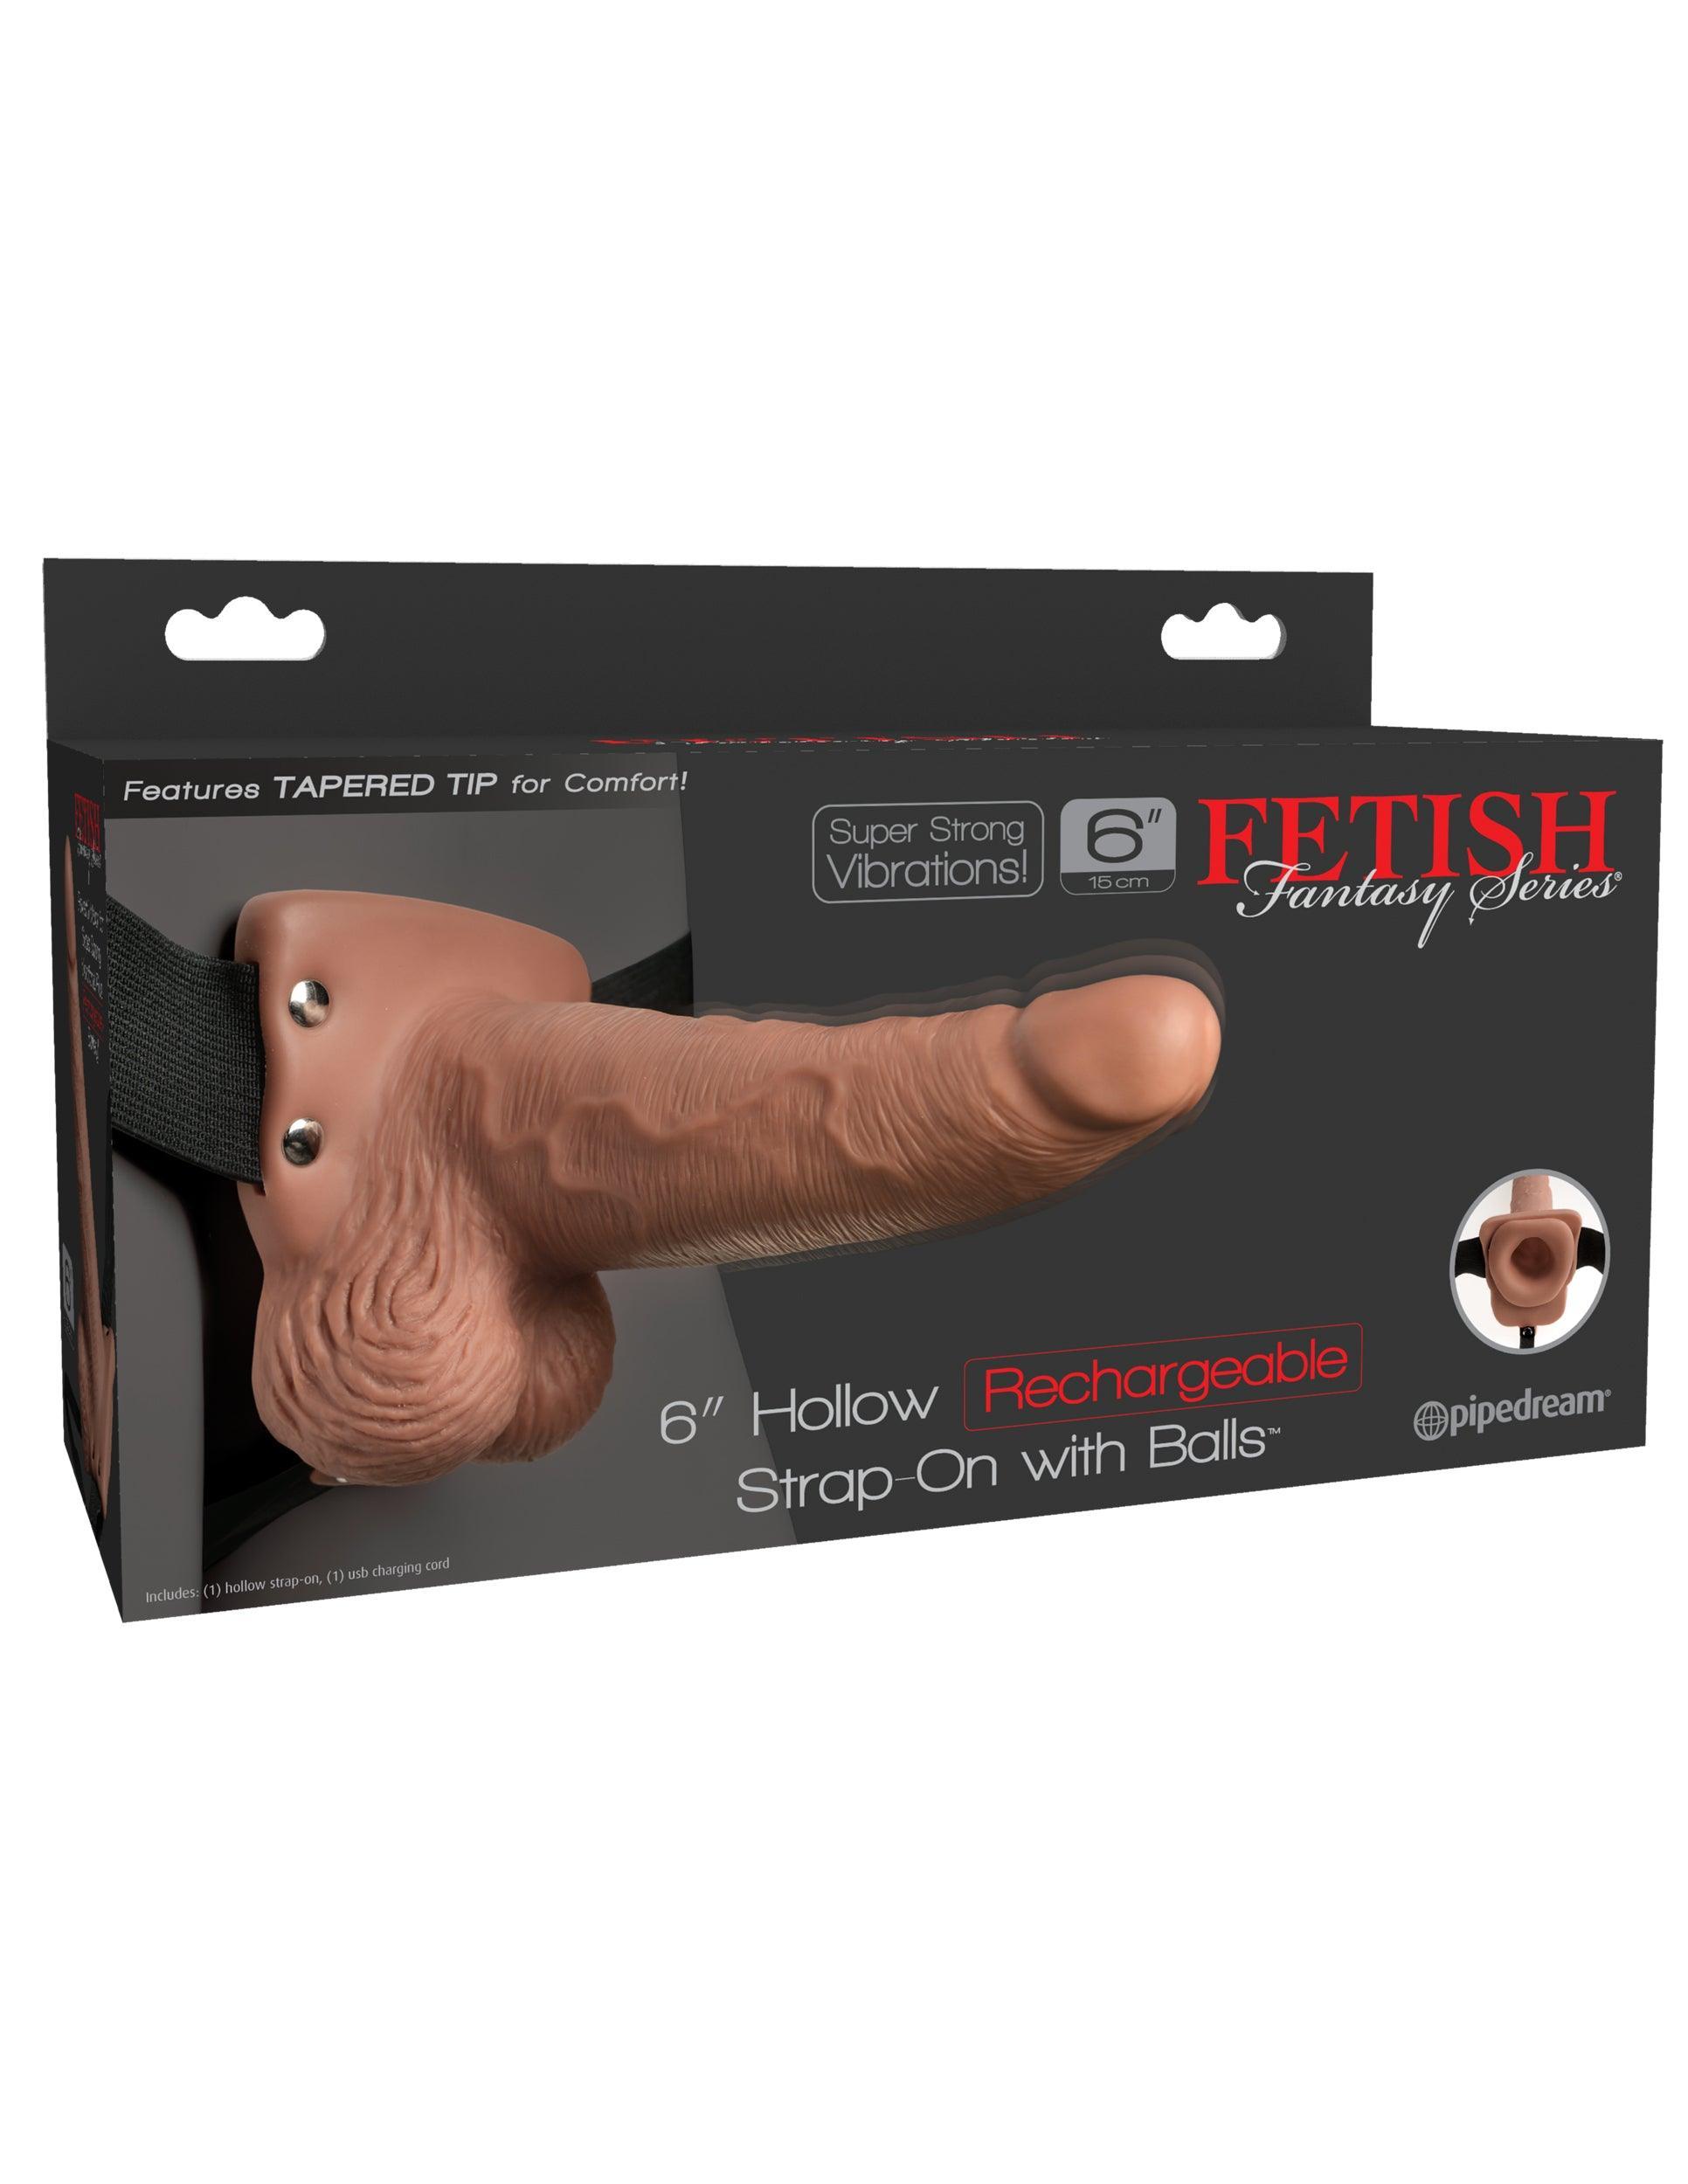 Fetish Fantasy Series 6 Inch Hollow Rechargeable Strap-on With Balls - Tan - My Sex Toy Hub